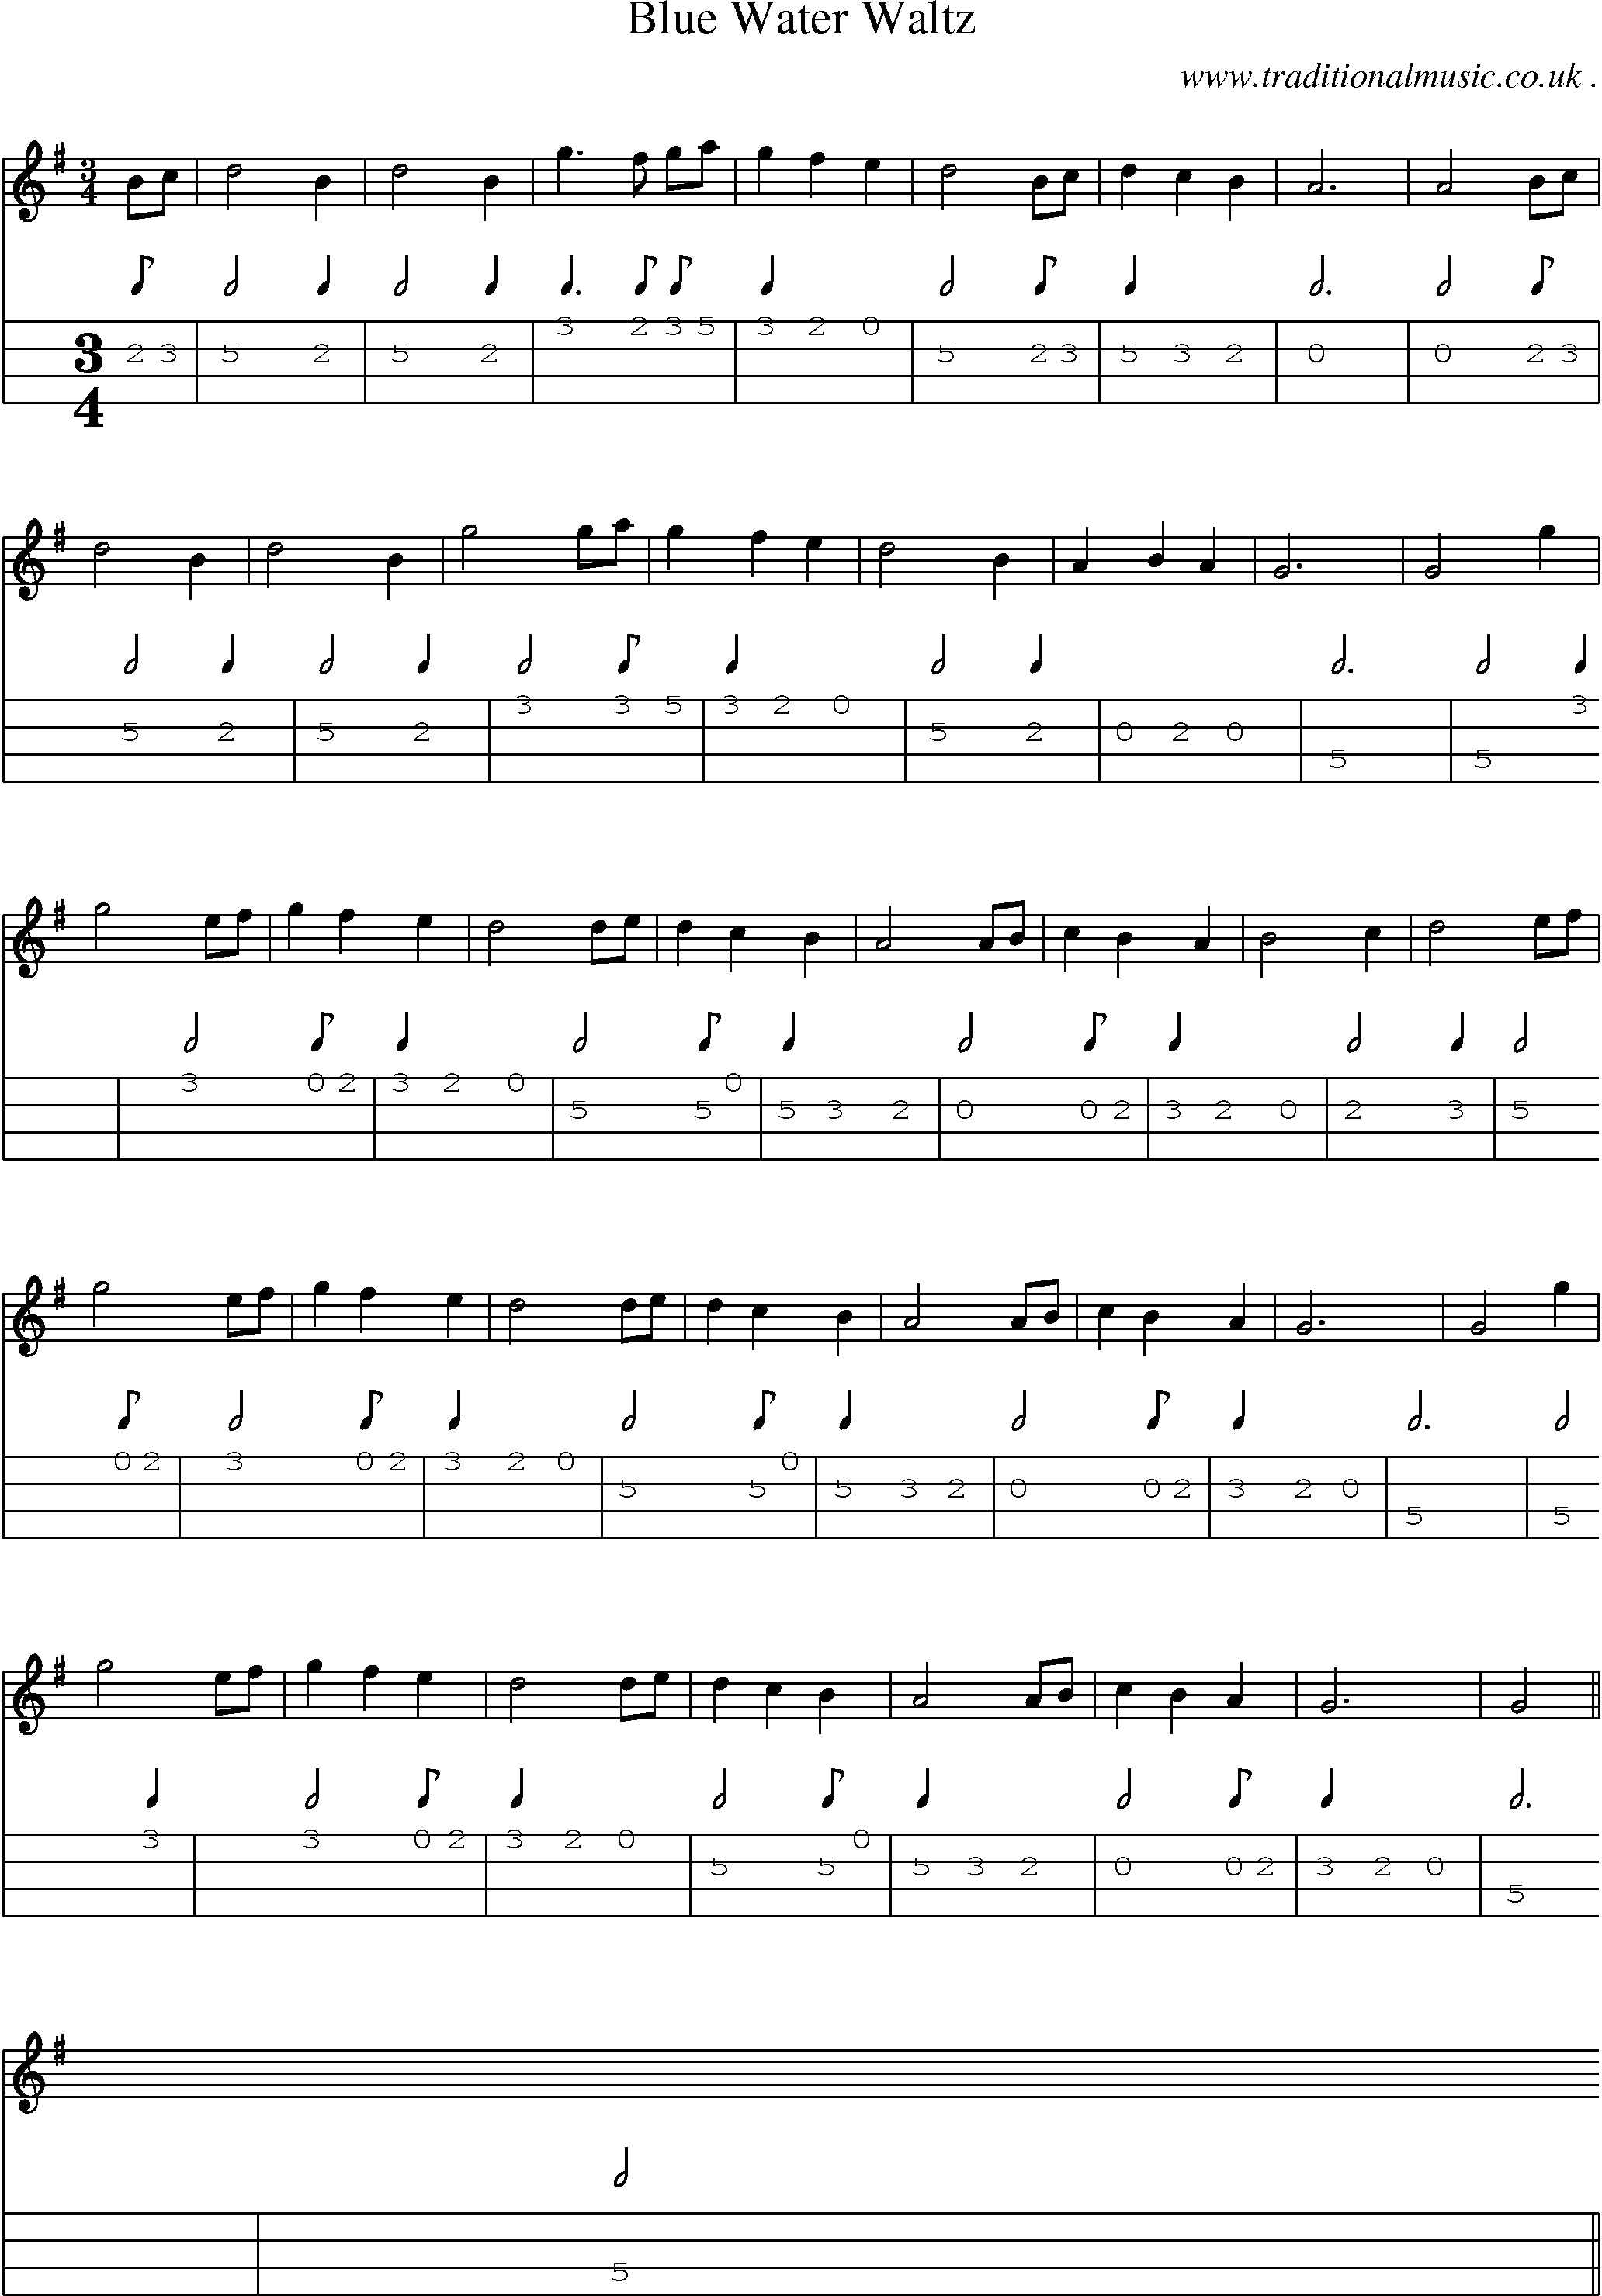 Sheet-music  score, Chords and Mandolin Tabs for Blue Water Waltz